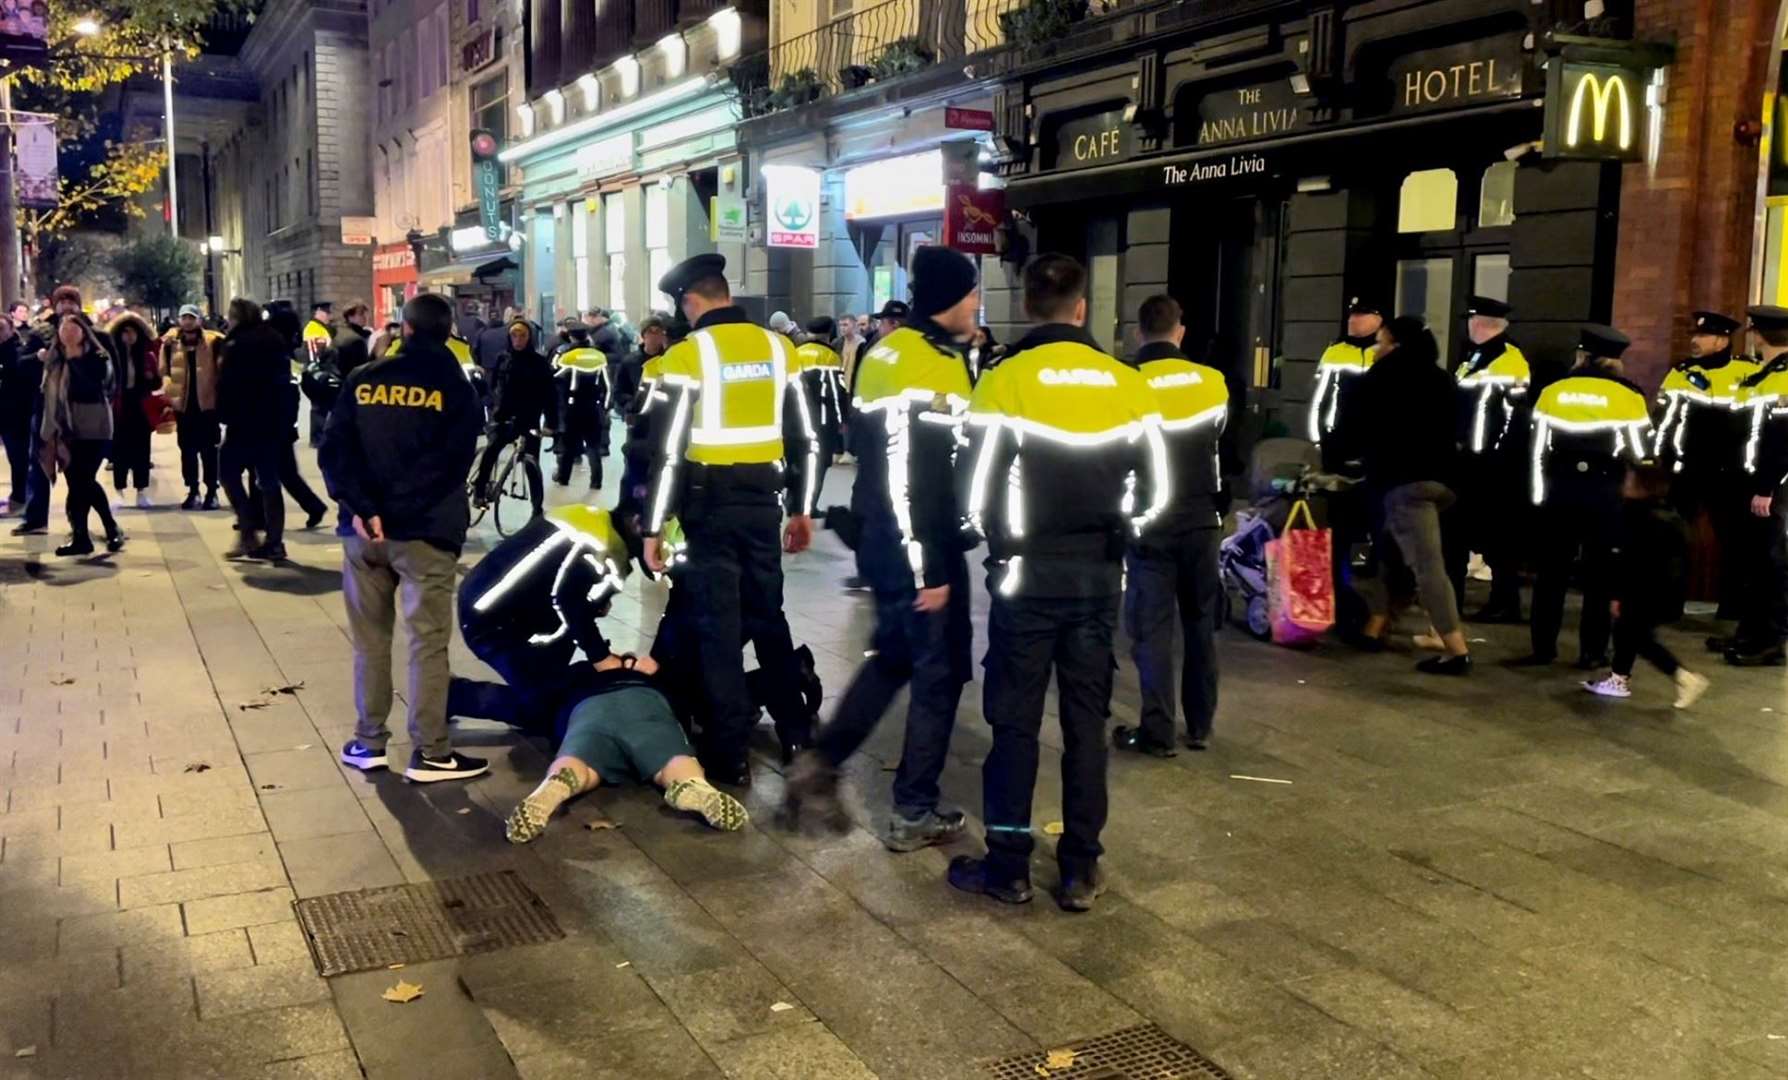 There was a heavy police presence in Dublin city centre on Friday night (David Young/PA)